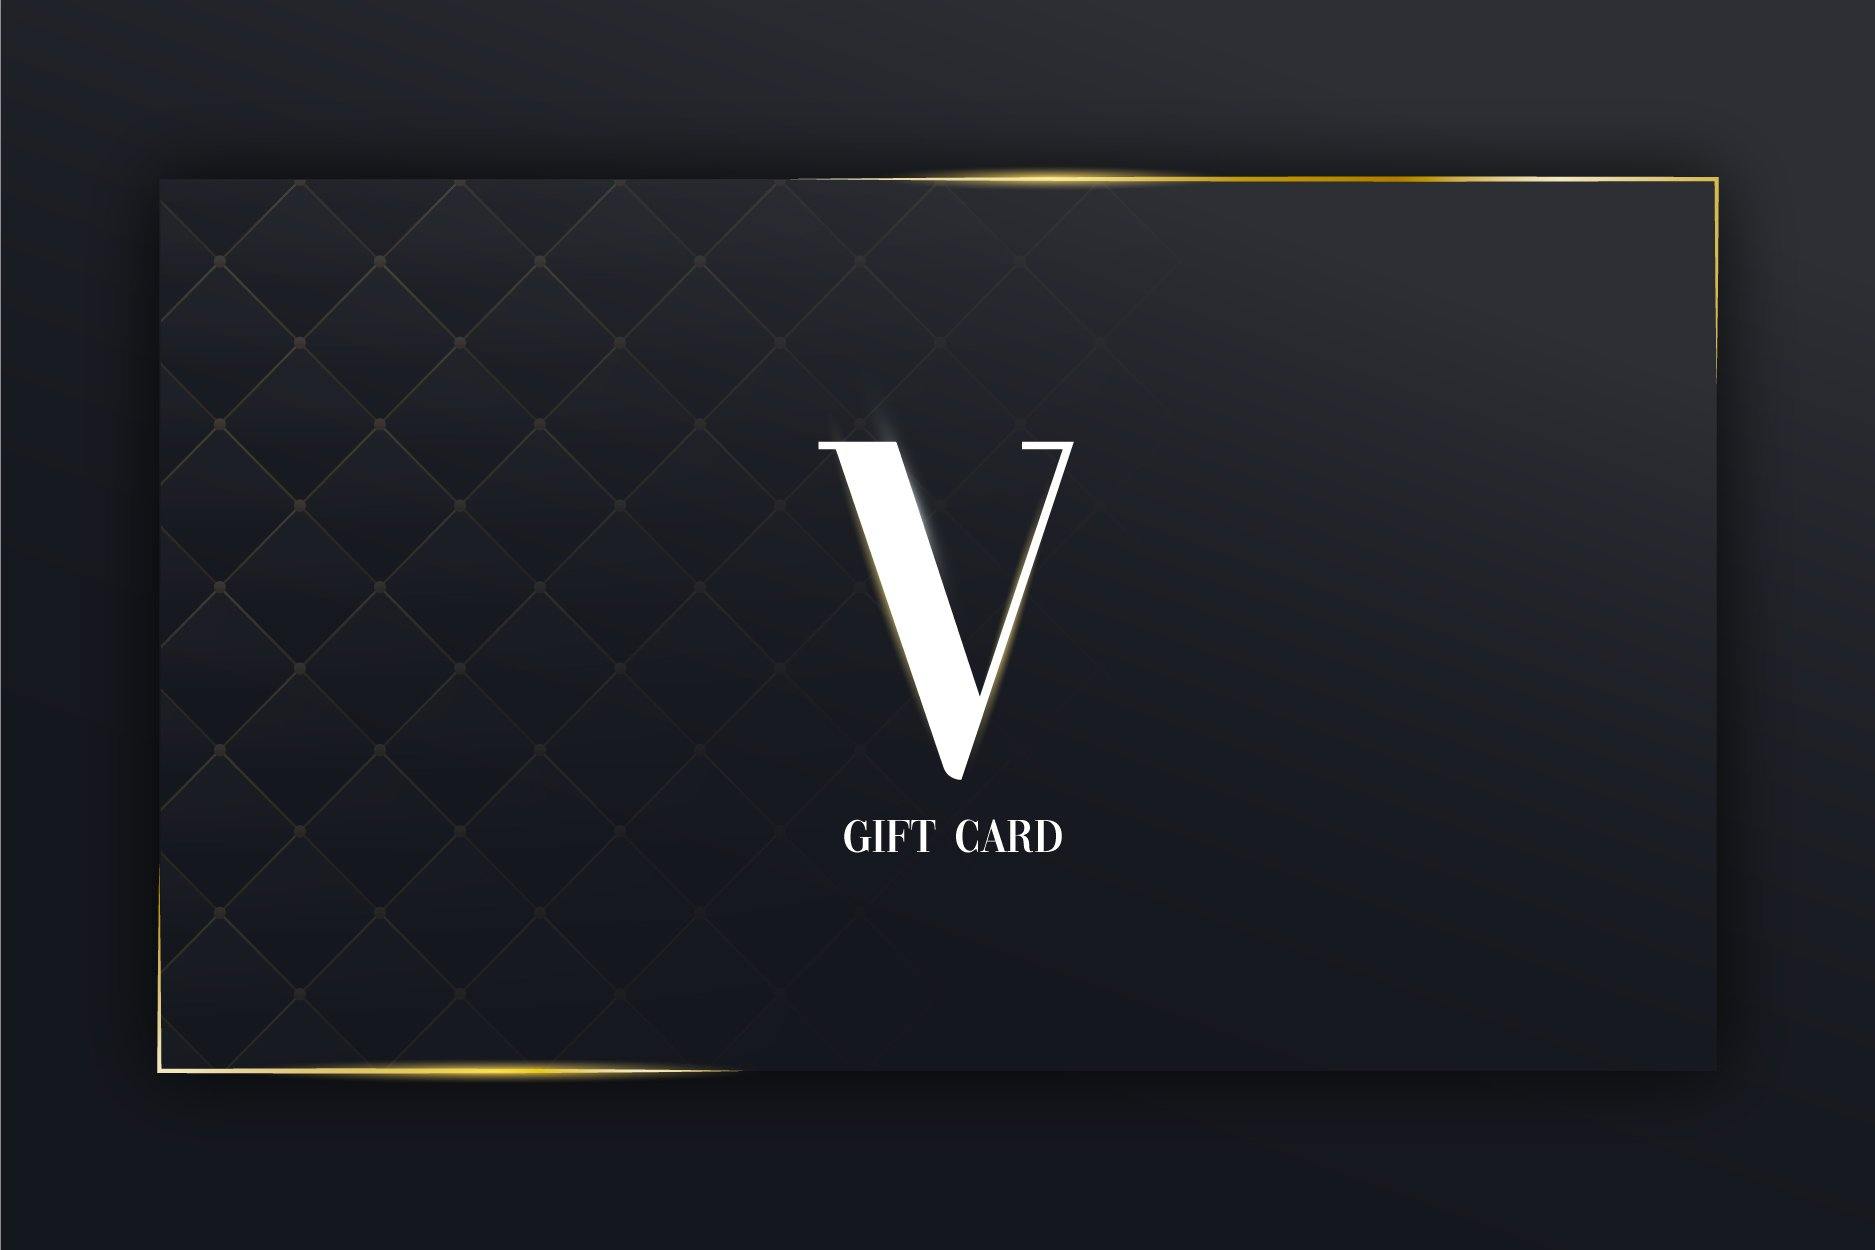 VOLONIC GIFT CARD